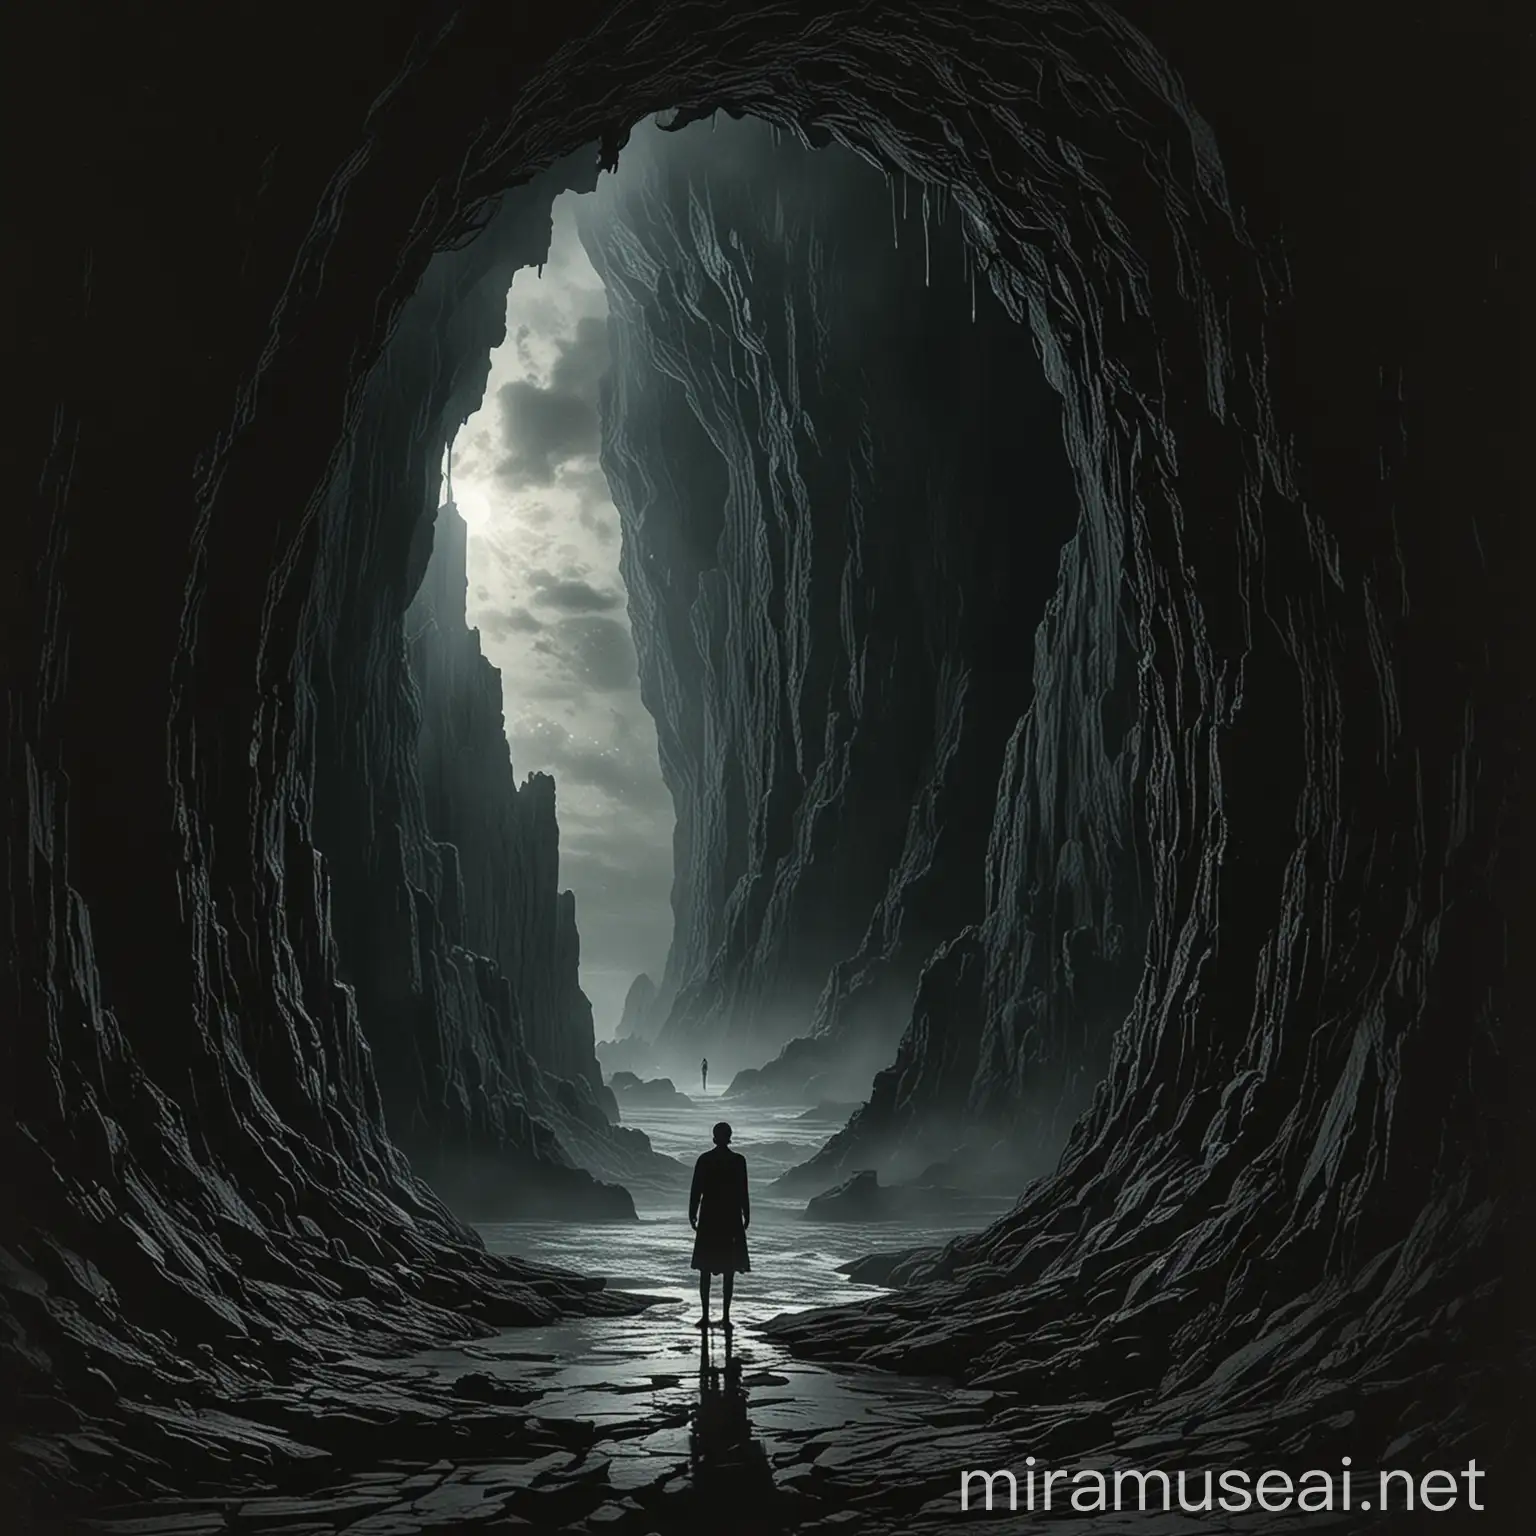 The album cover features a surrealistic scene where a shadowy figure stands at the edge of a cliff, staring out into a swirling vortex of light and darkness. The figure's reflection in the abyss below is distorted, symbolizing the complex themes of paradox, denial, and the contradictions of life and death.